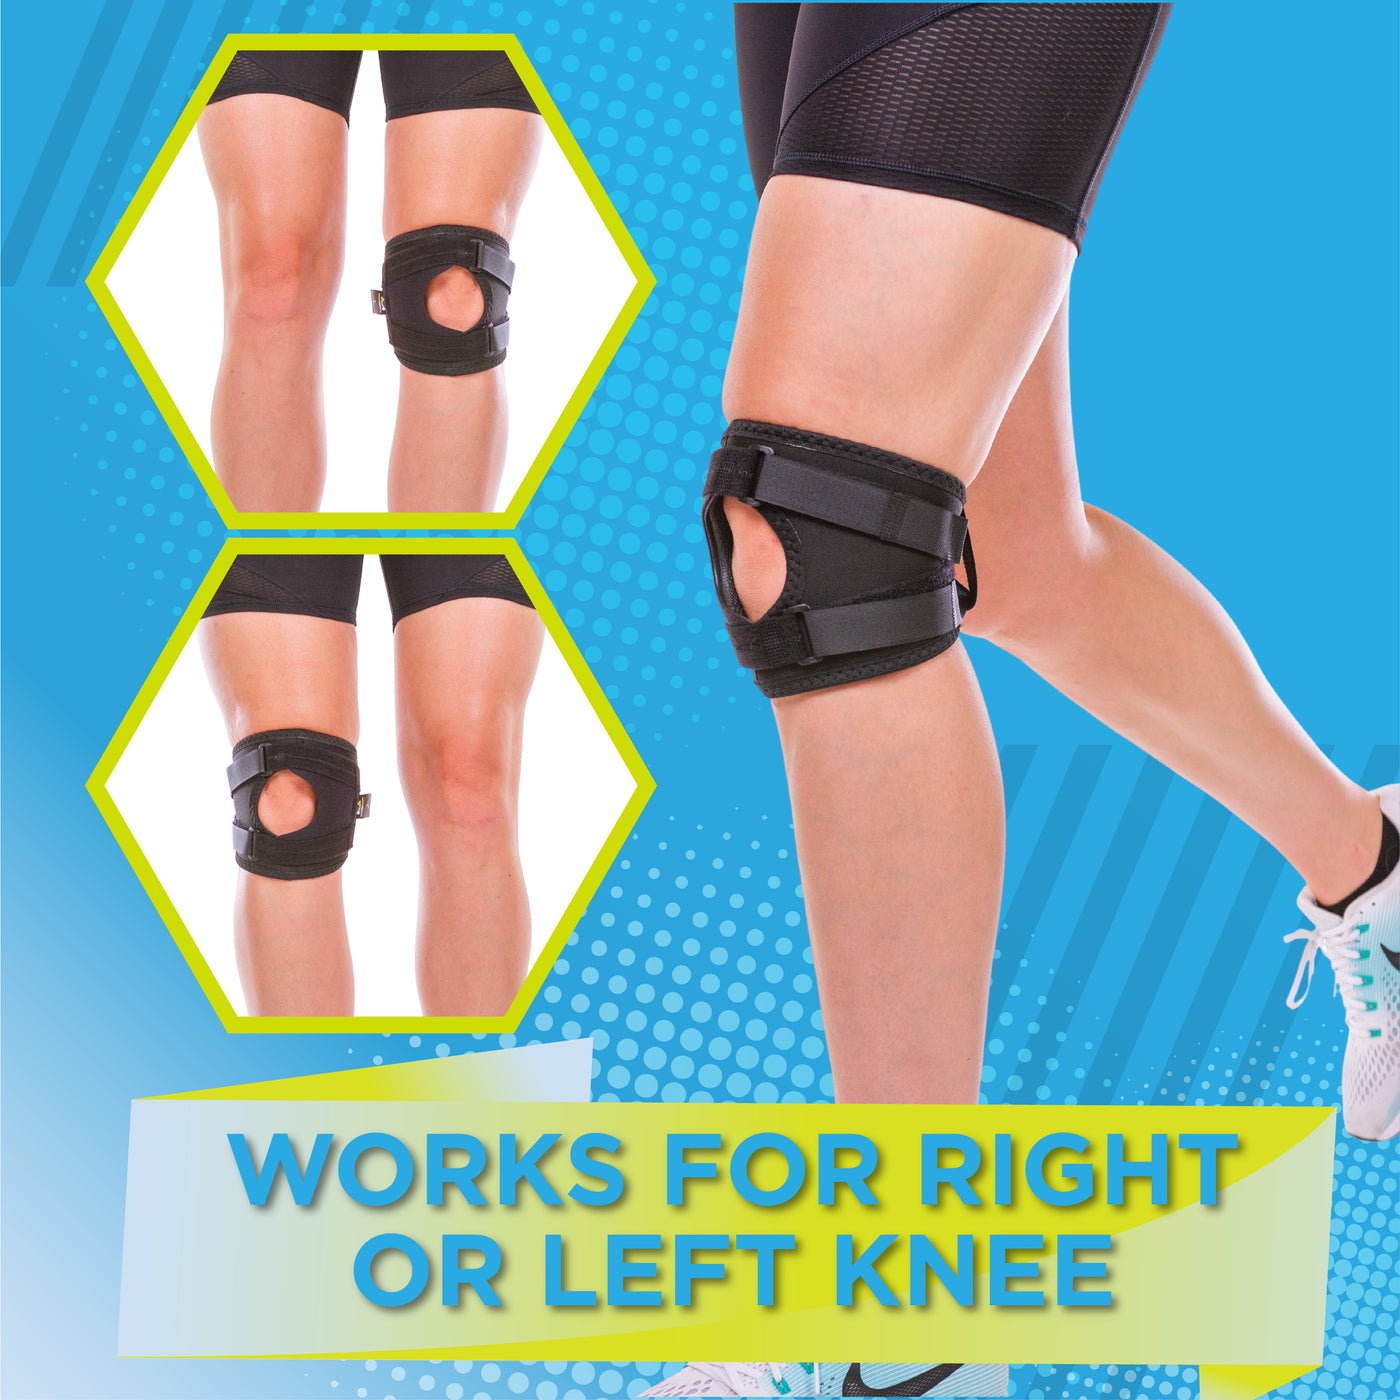 The running knee brace for loose kneecaps works for right or left knee pain